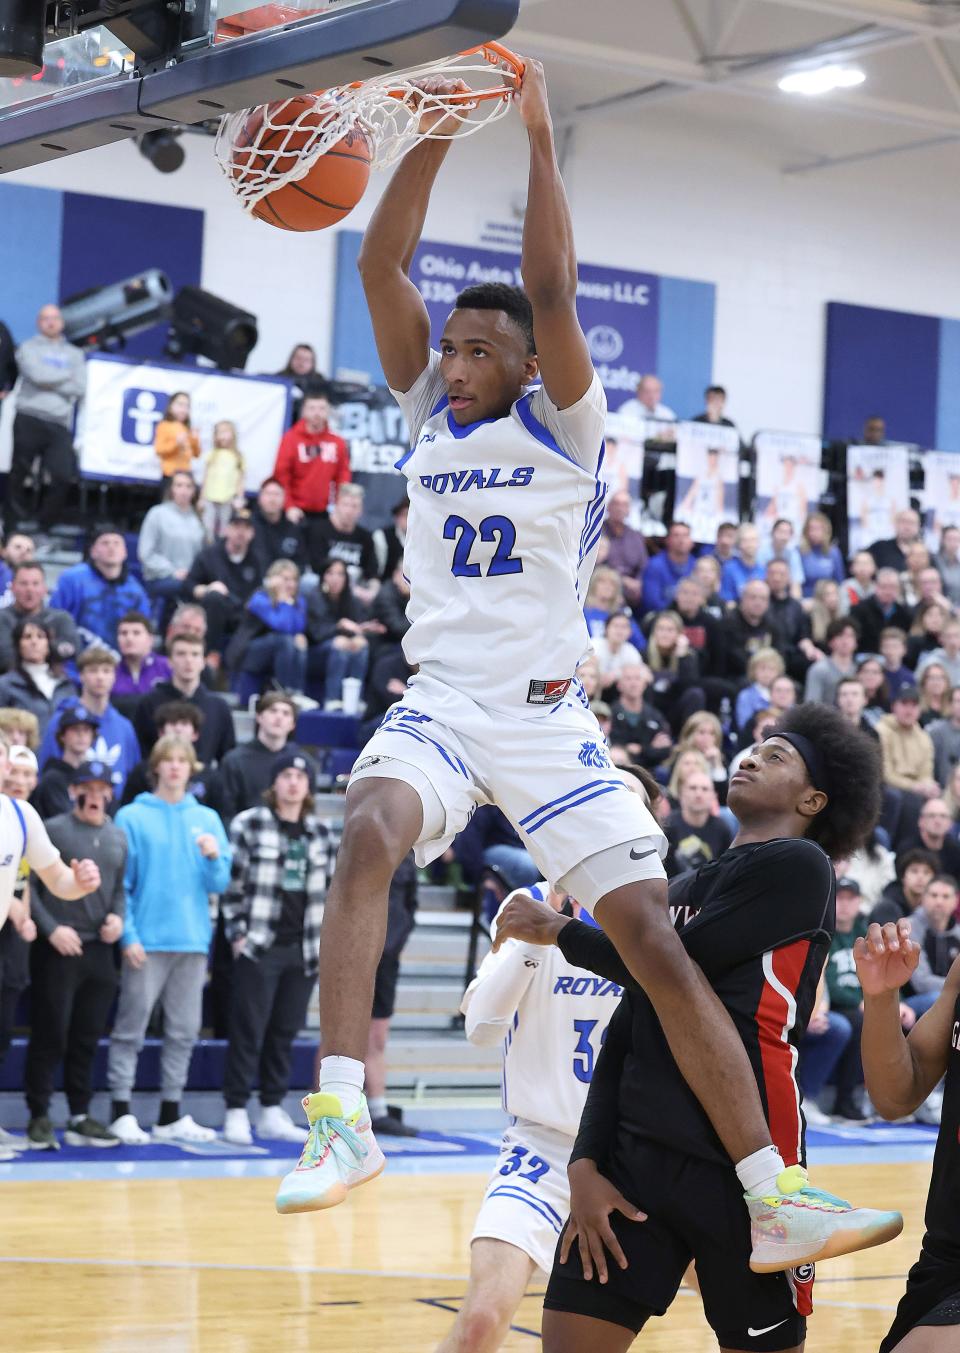 CVCA’s Darryn Peterson slam dunks in the second half with pressure from Glenville’s Damion Witten at Louisville High School Saturday.